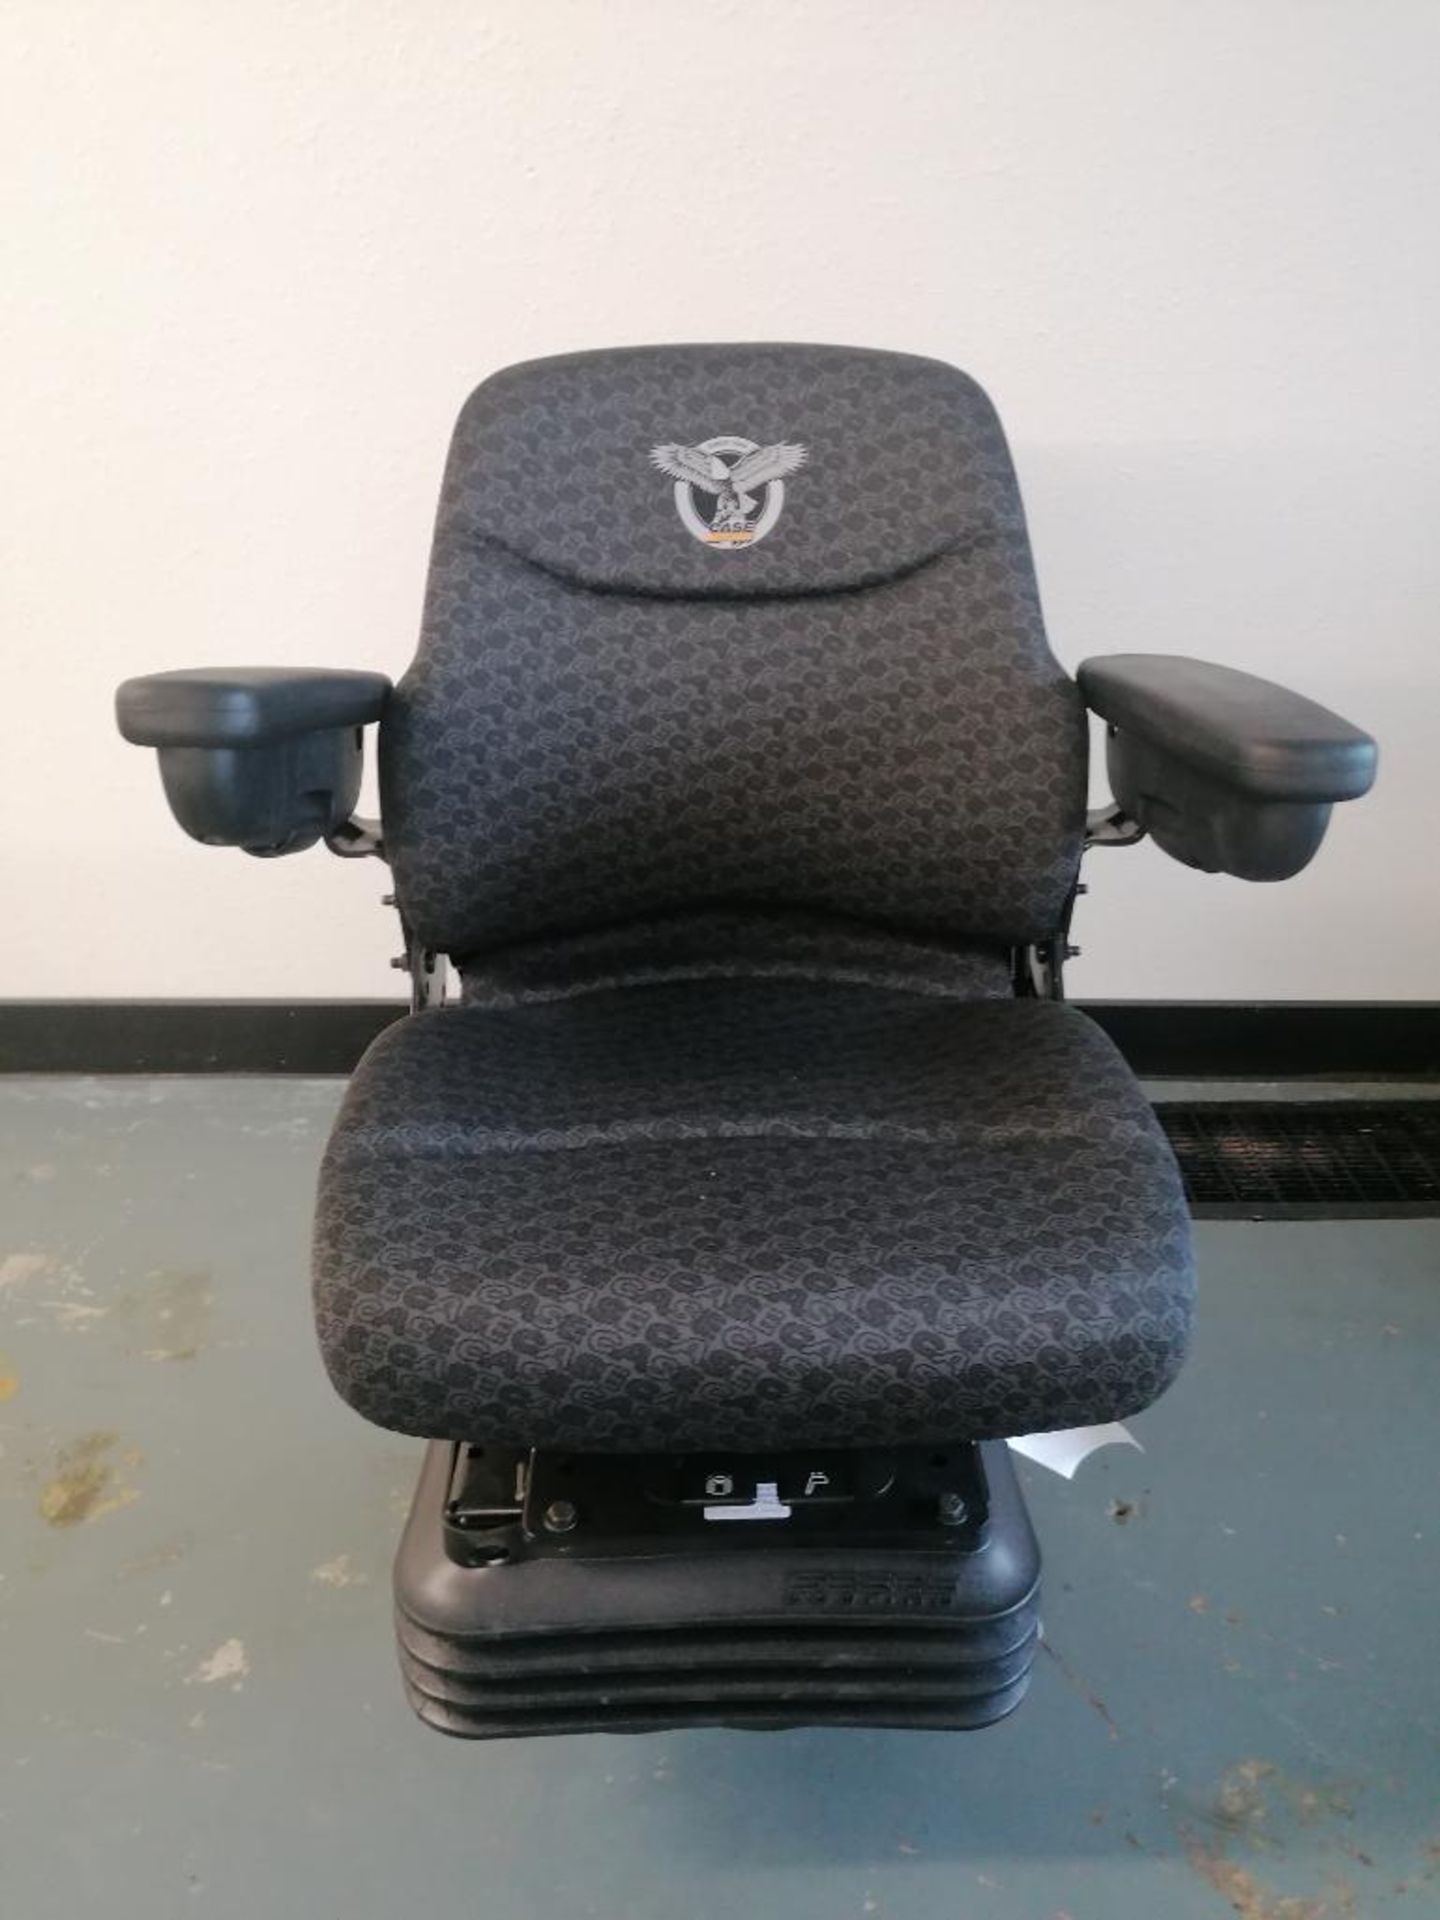 CNH Air Suspension Seat for Case Backhoe, Serial #007091742359. Located in Mt. Pleasant, IA.